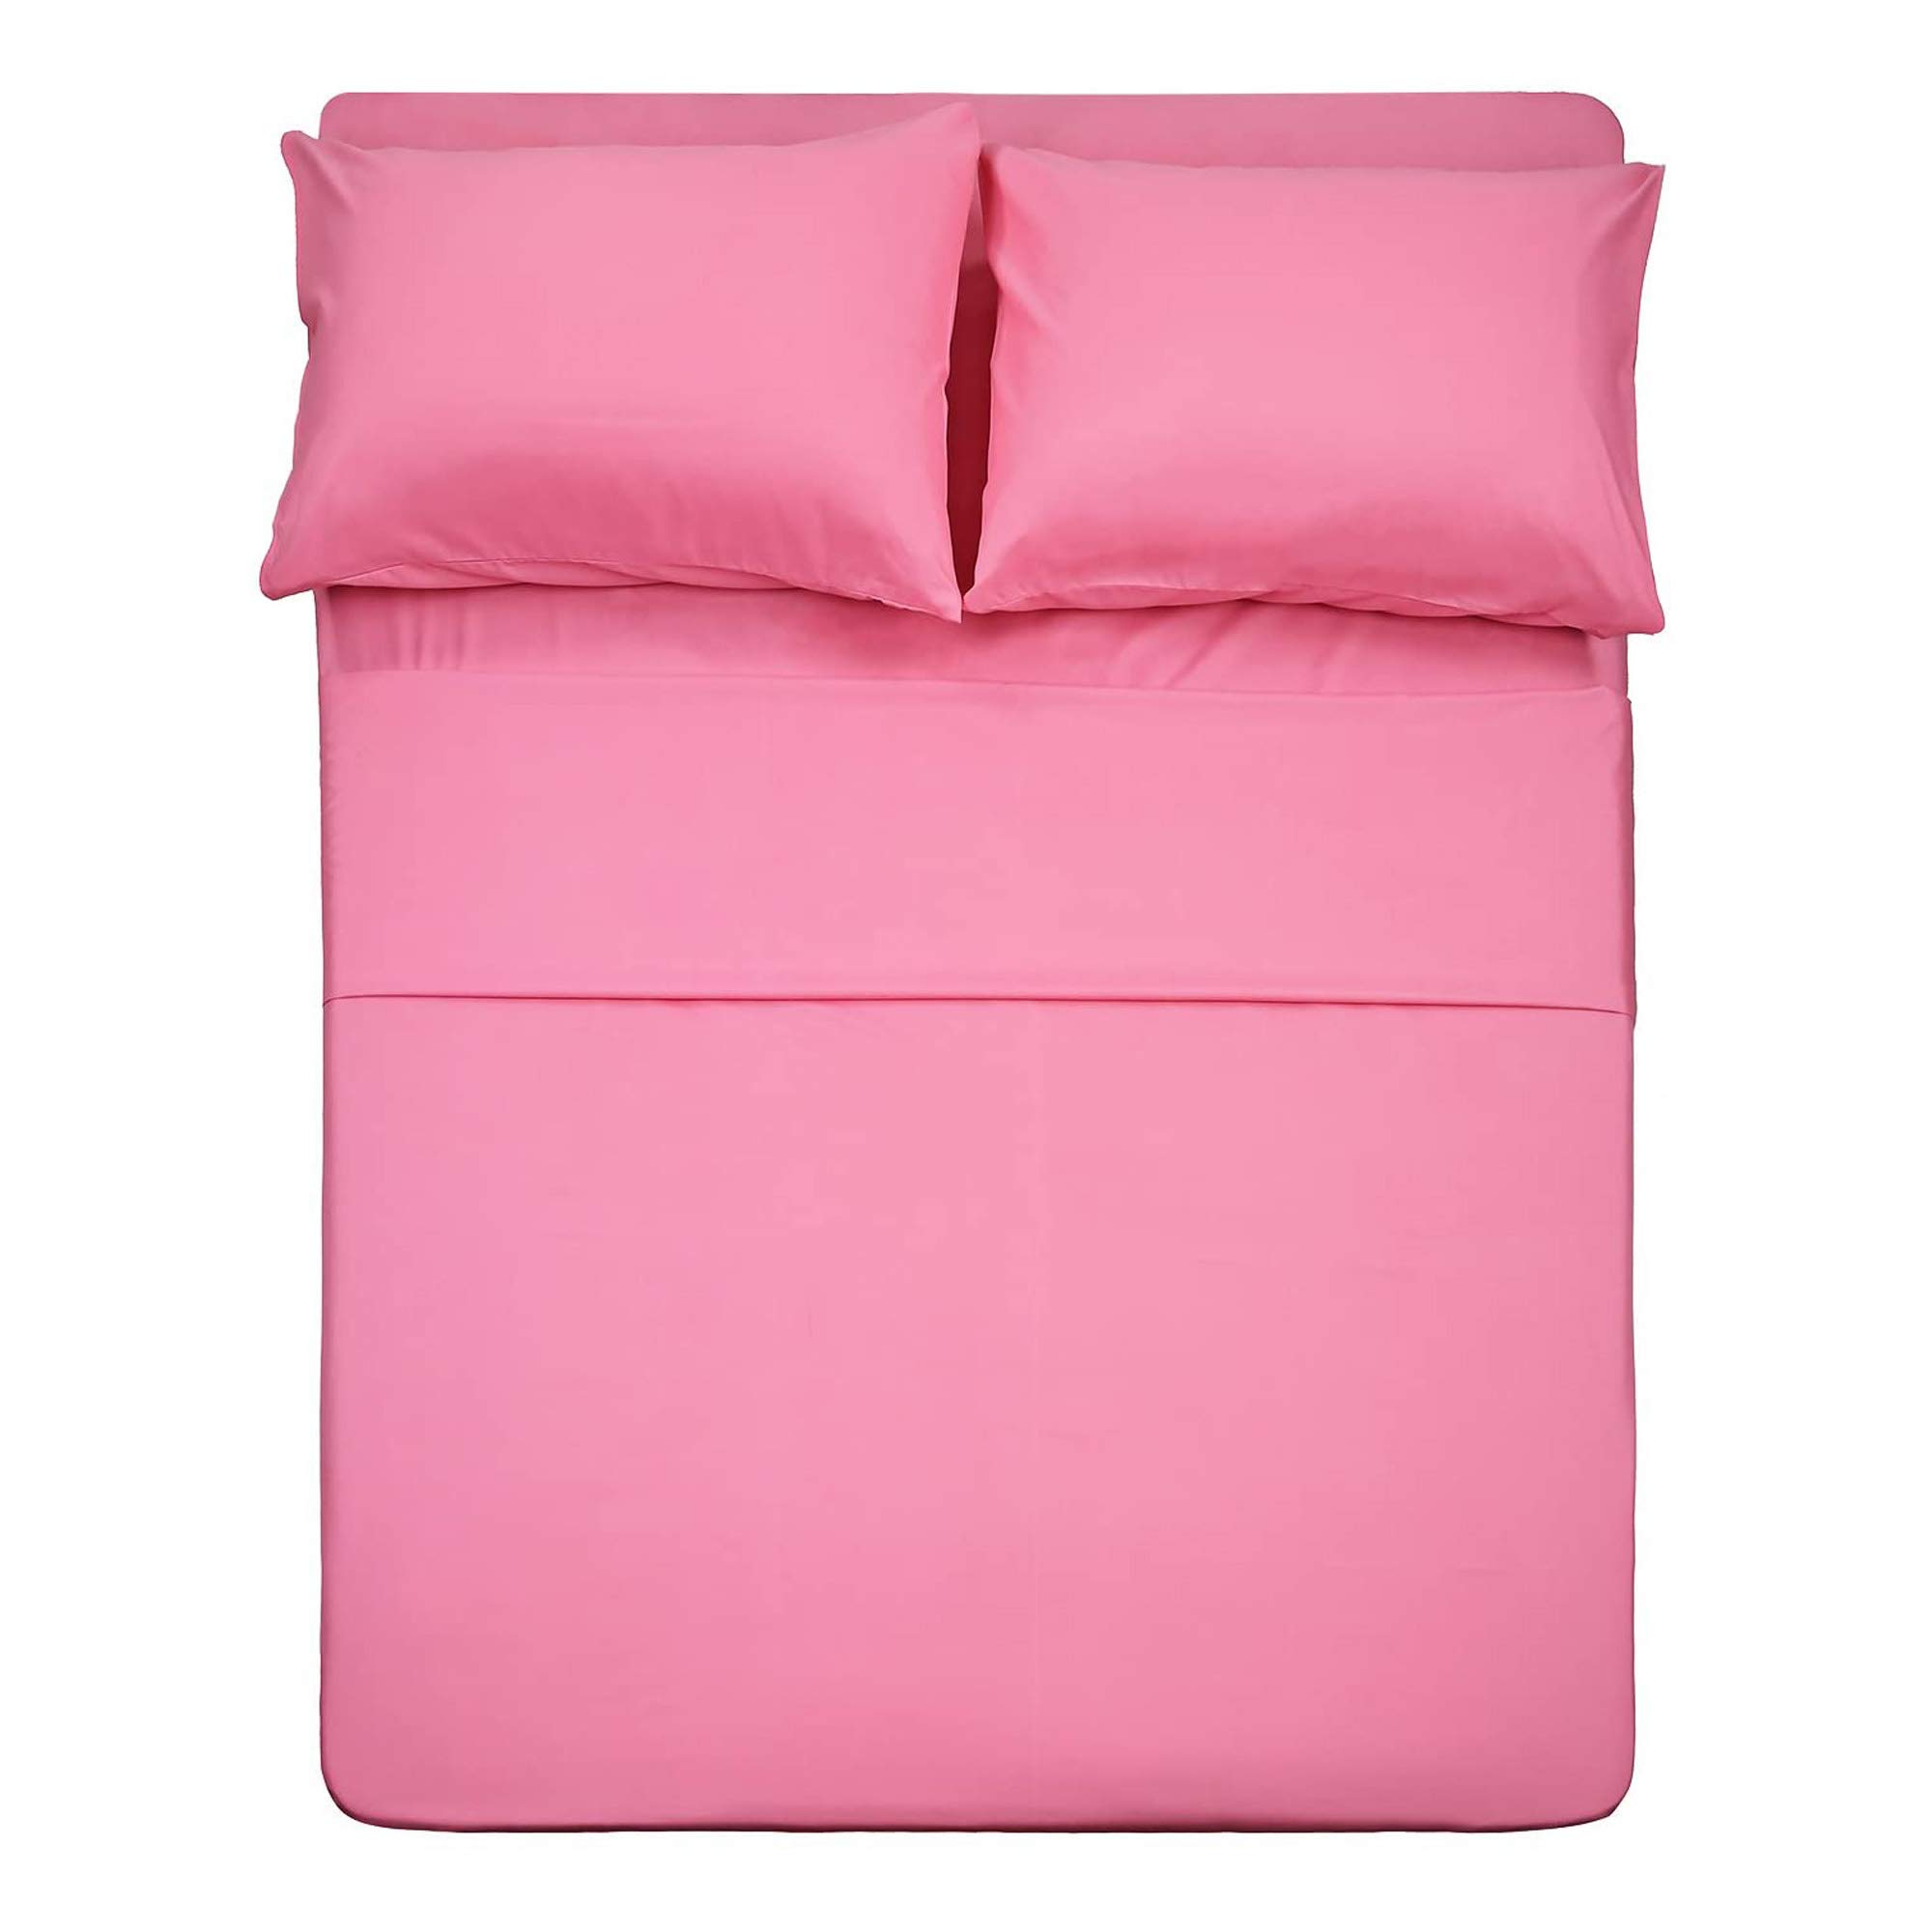 Book Cover 4 Piece Bed Sheet Set (Full,Peach Pink) 1 Flat Sheet,1 Fitted Sheet and 2 Pillow Cases,Brushed Microfiber Luxury Bedding with Deep Pockets Pink Full